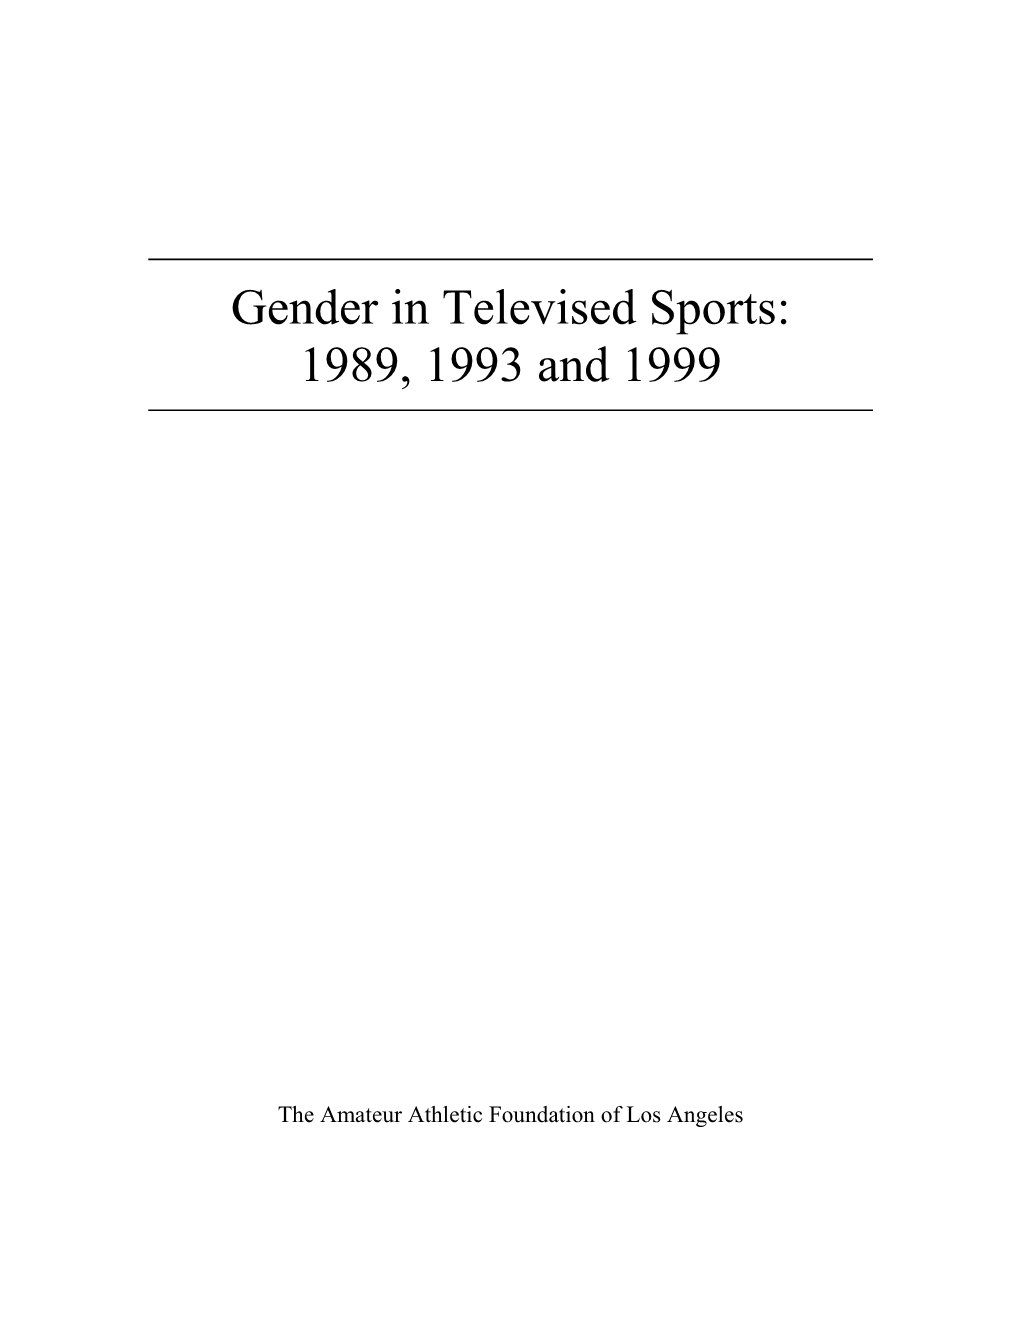 Gender in Televised Sports: 1989, 1993 and 1999